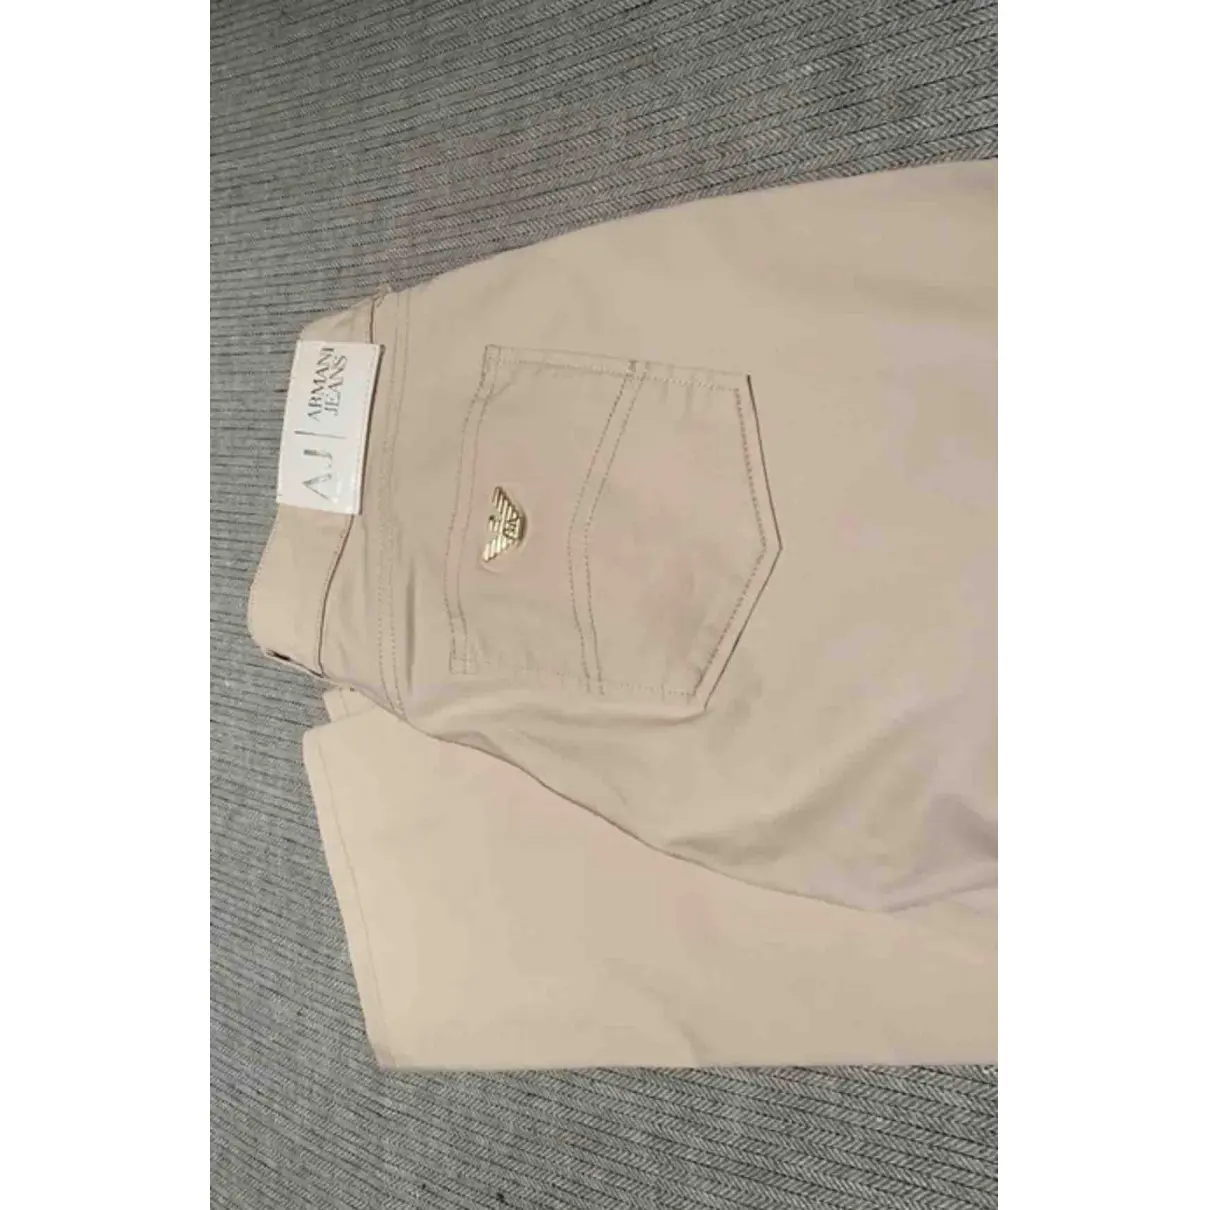 Armani Jeans Straight pants for sale